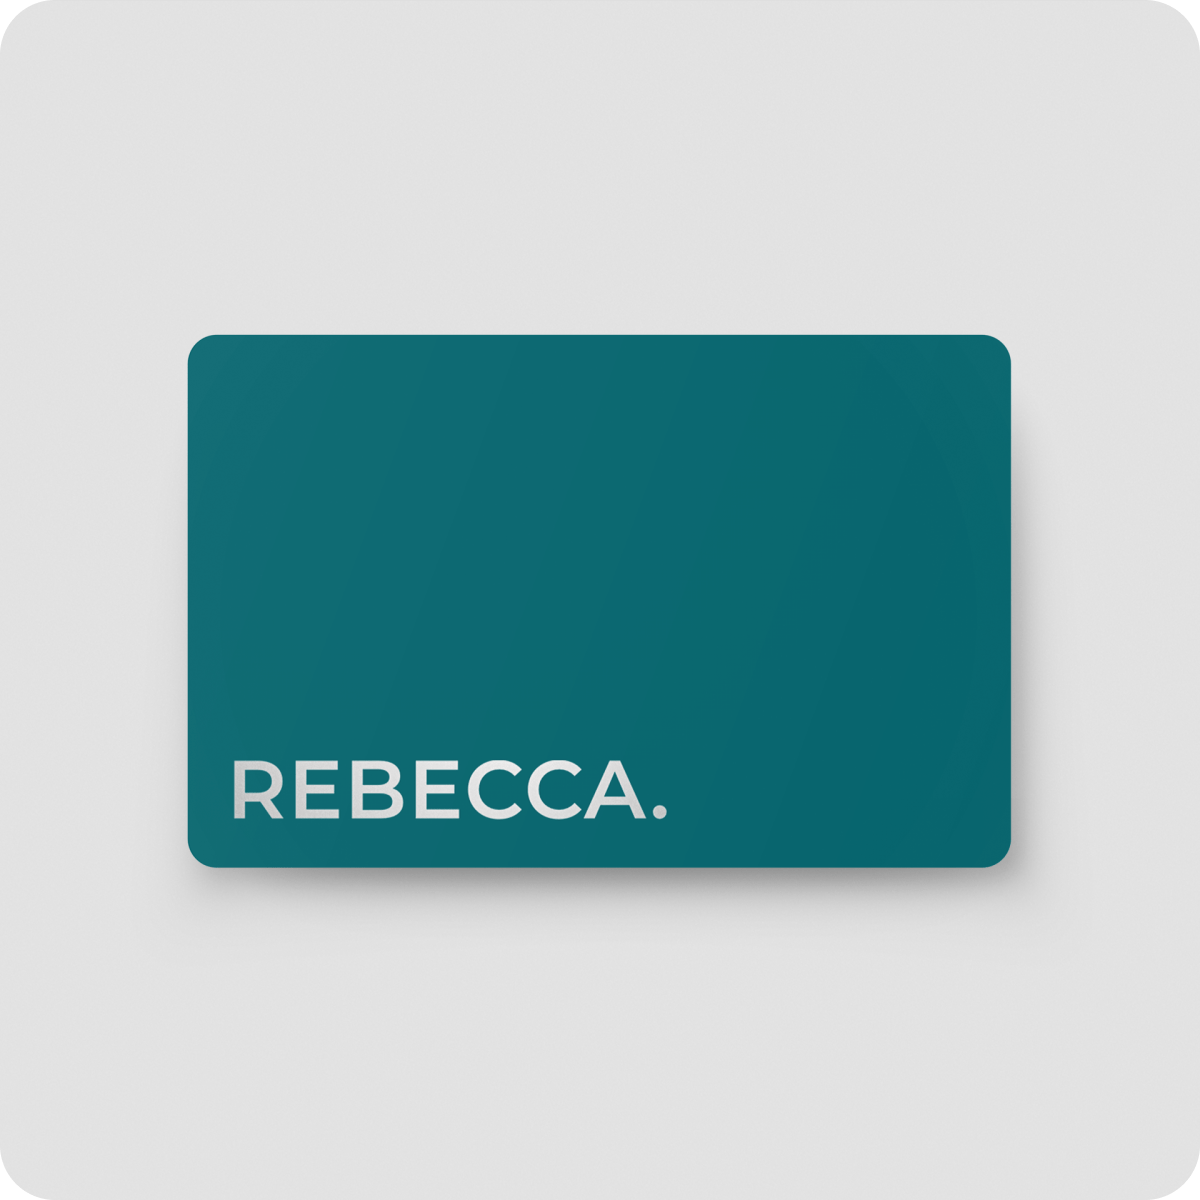 One Good Card | Smart Digital Name Card (Classic) - Personalised Near Field Communication (NFC) Business Cards designs.